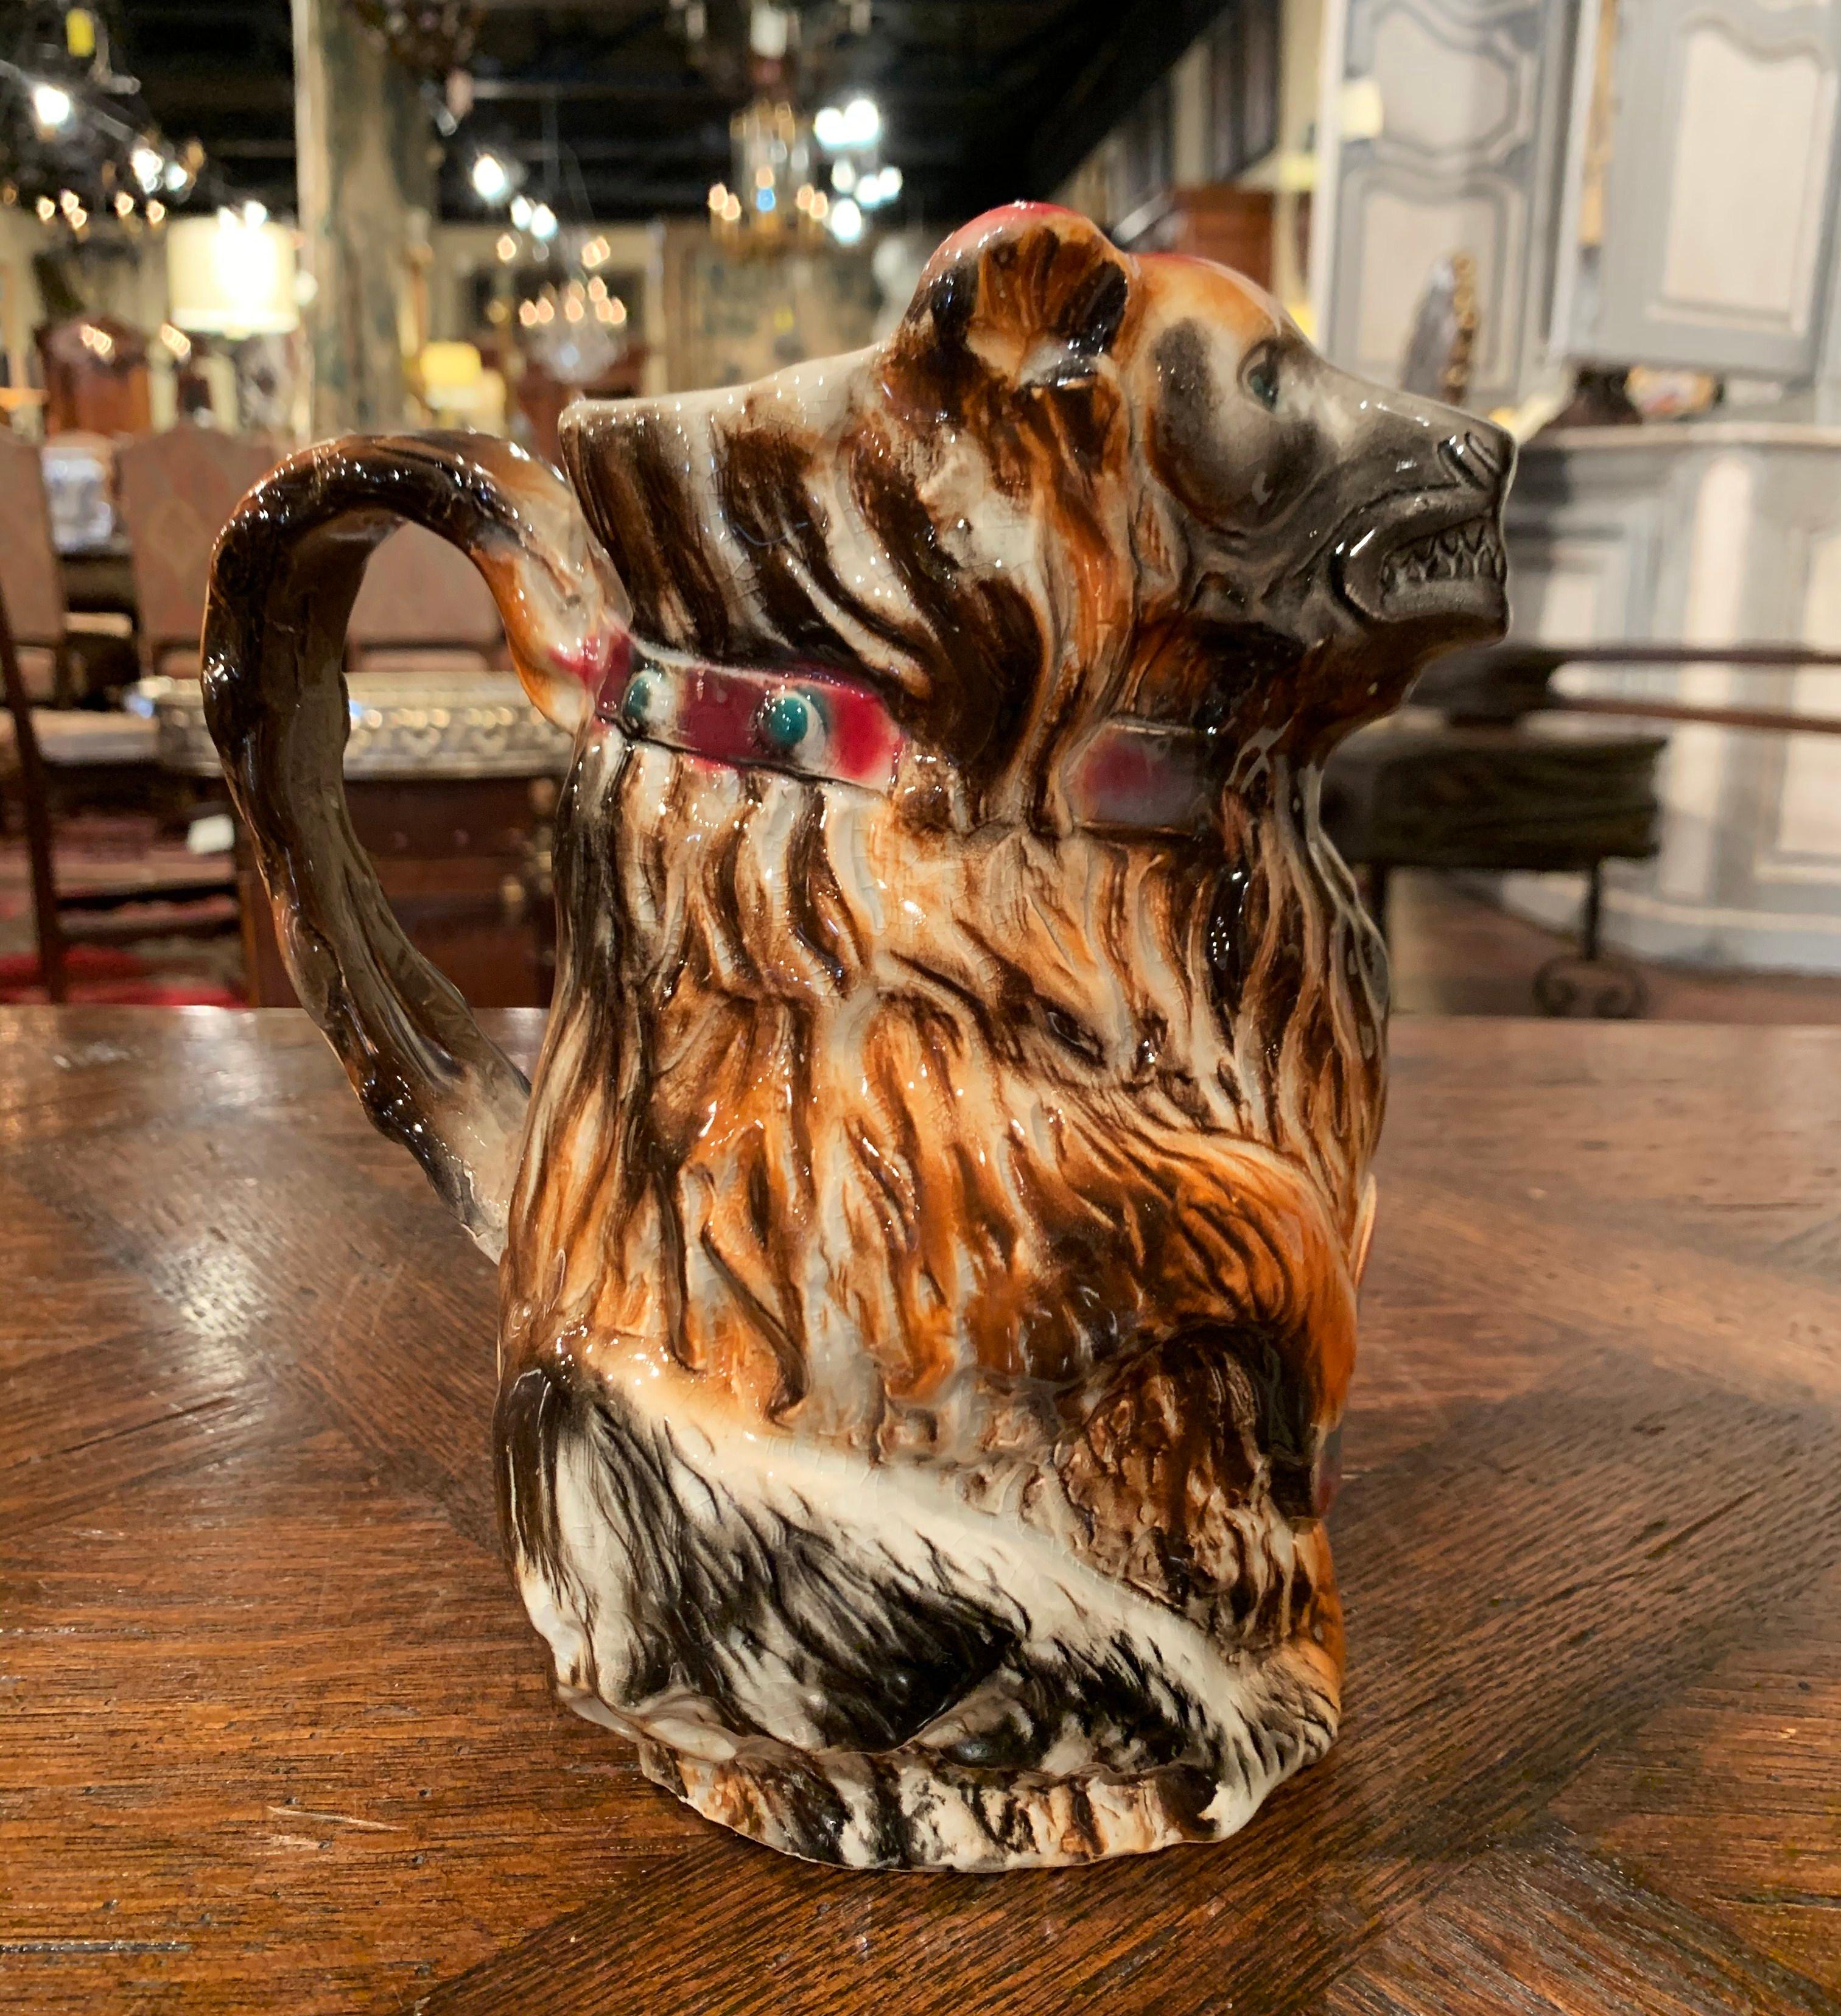 Add to a whimsical porcelain collection with this elegant antique Majolica pitcher. Crafted in southeast France circa 1890 in the faiencerie Coursange of Poet-Laval, the figural pitcher features a standing bear with his front arms resting on his